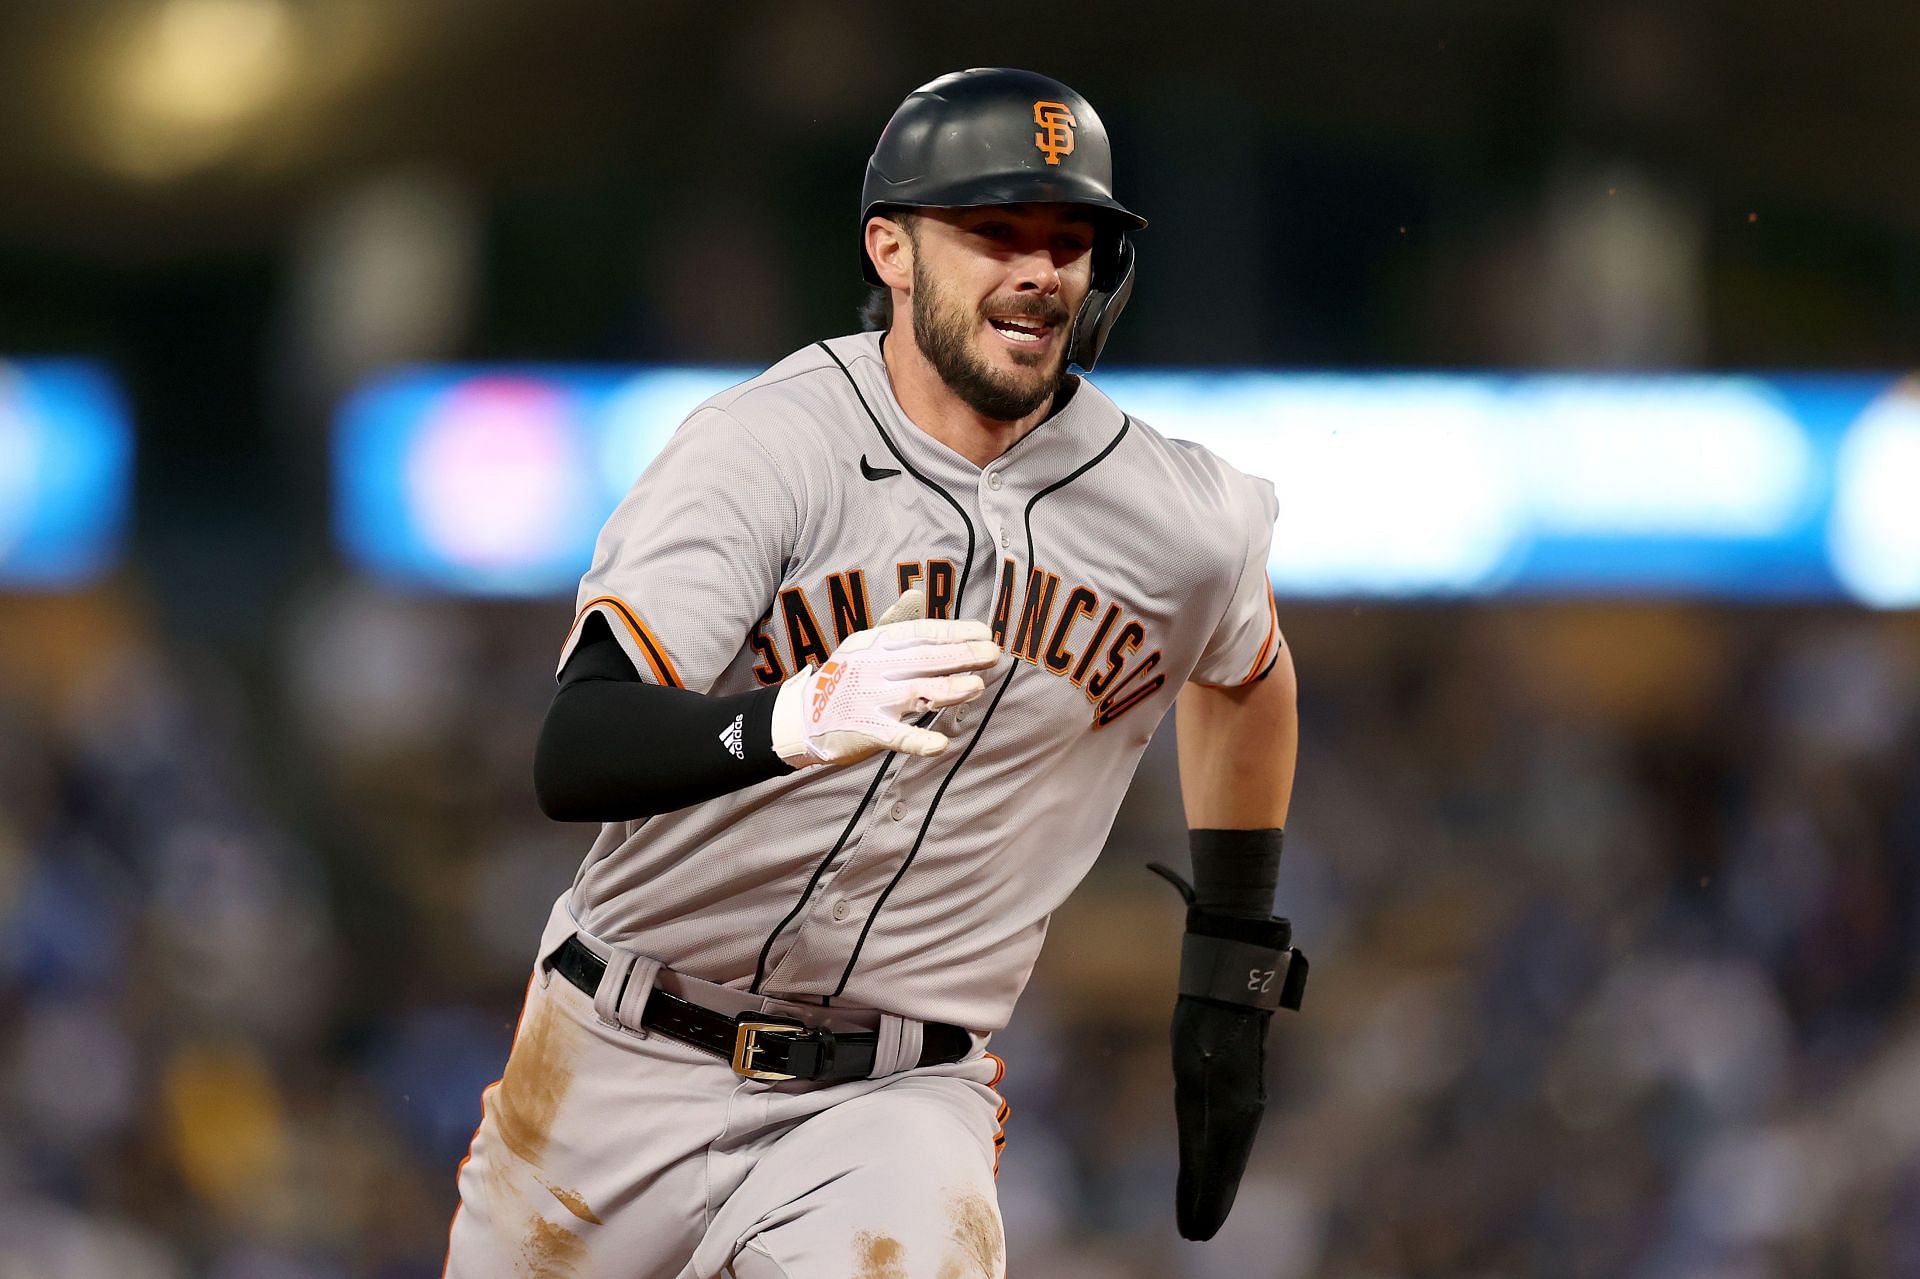 Division Series - San Francisco Giants v Los Angeles Dodgers - Game Four: LOS ANGELES, CALIFORNIA - OCTOBER 12: Kris Bryant #23 of the San Francisco Giants runs to third base against the Los Angeles Dodgers second inning in game 4 of the National League Division Series at Dodger Stadium on October 12, 2021, in Los Angeles, California. (Photo by Ronald Martinez/Getty Images)